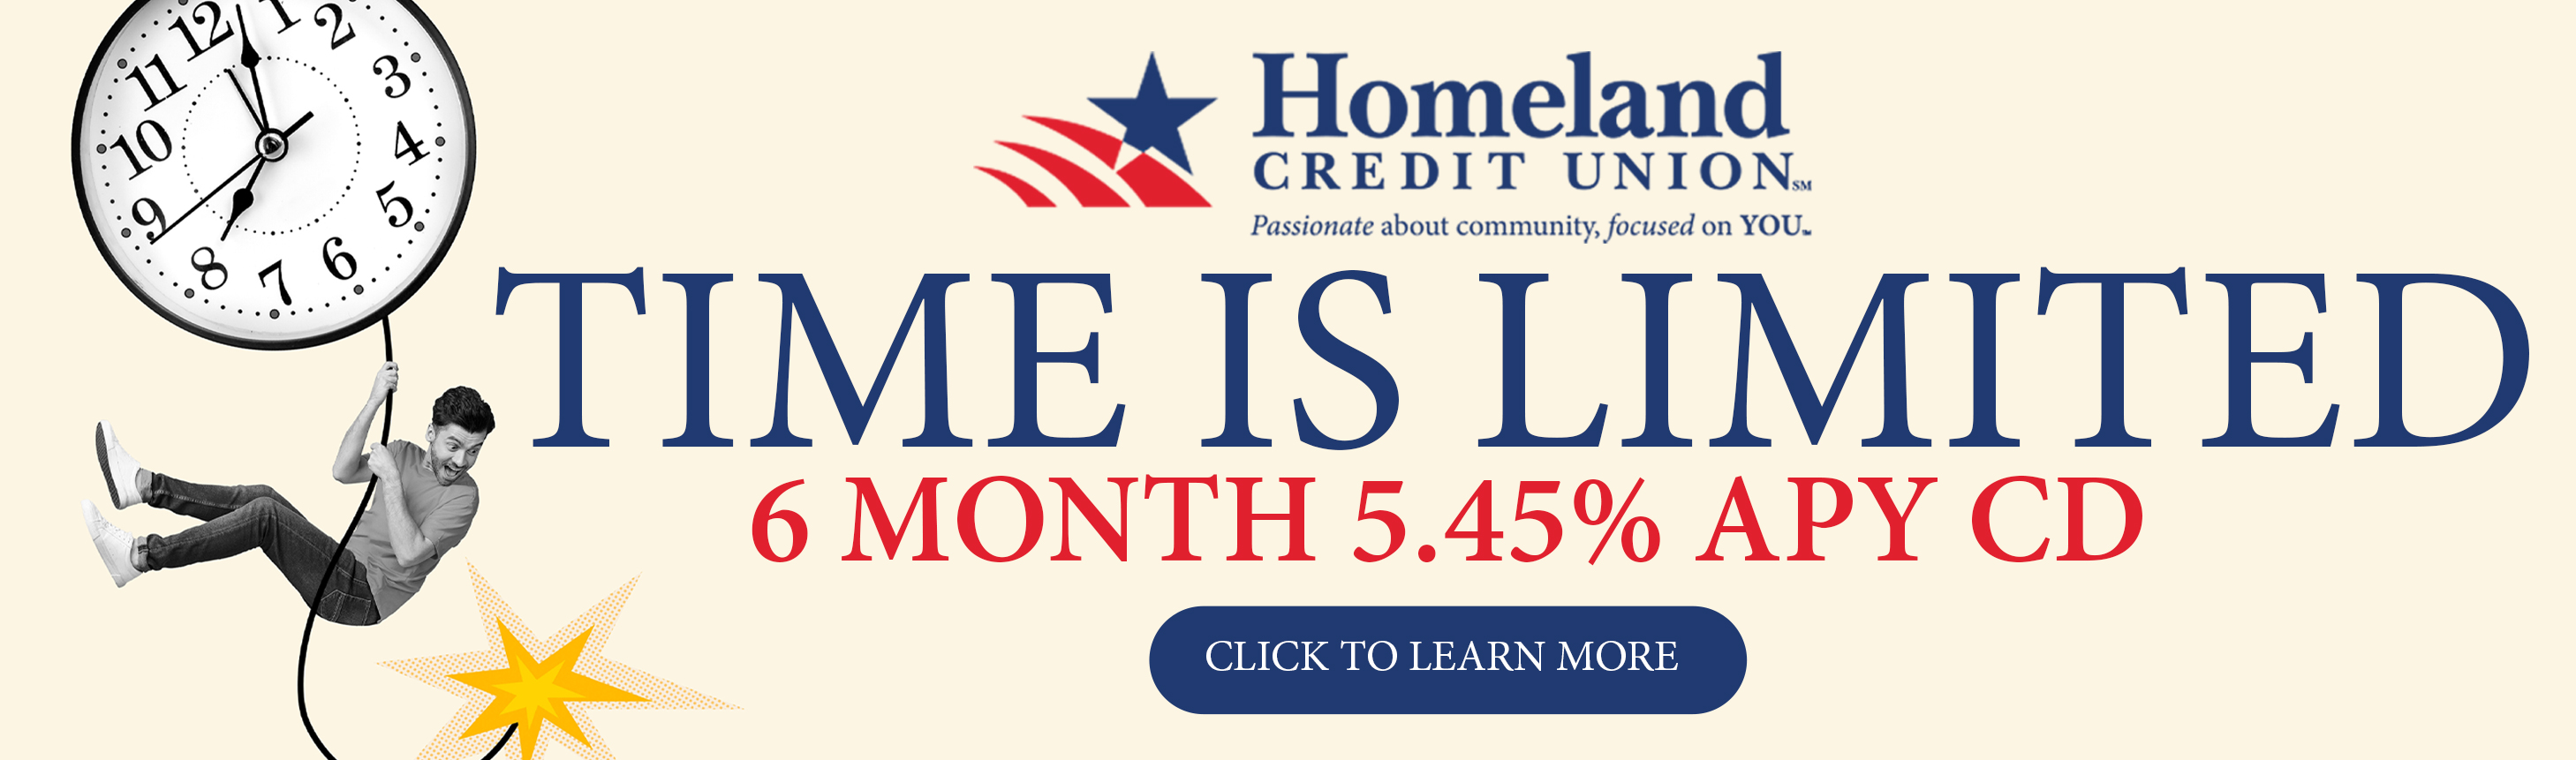 Time is limited. 6 month 5.45% APY CD Click to learn more